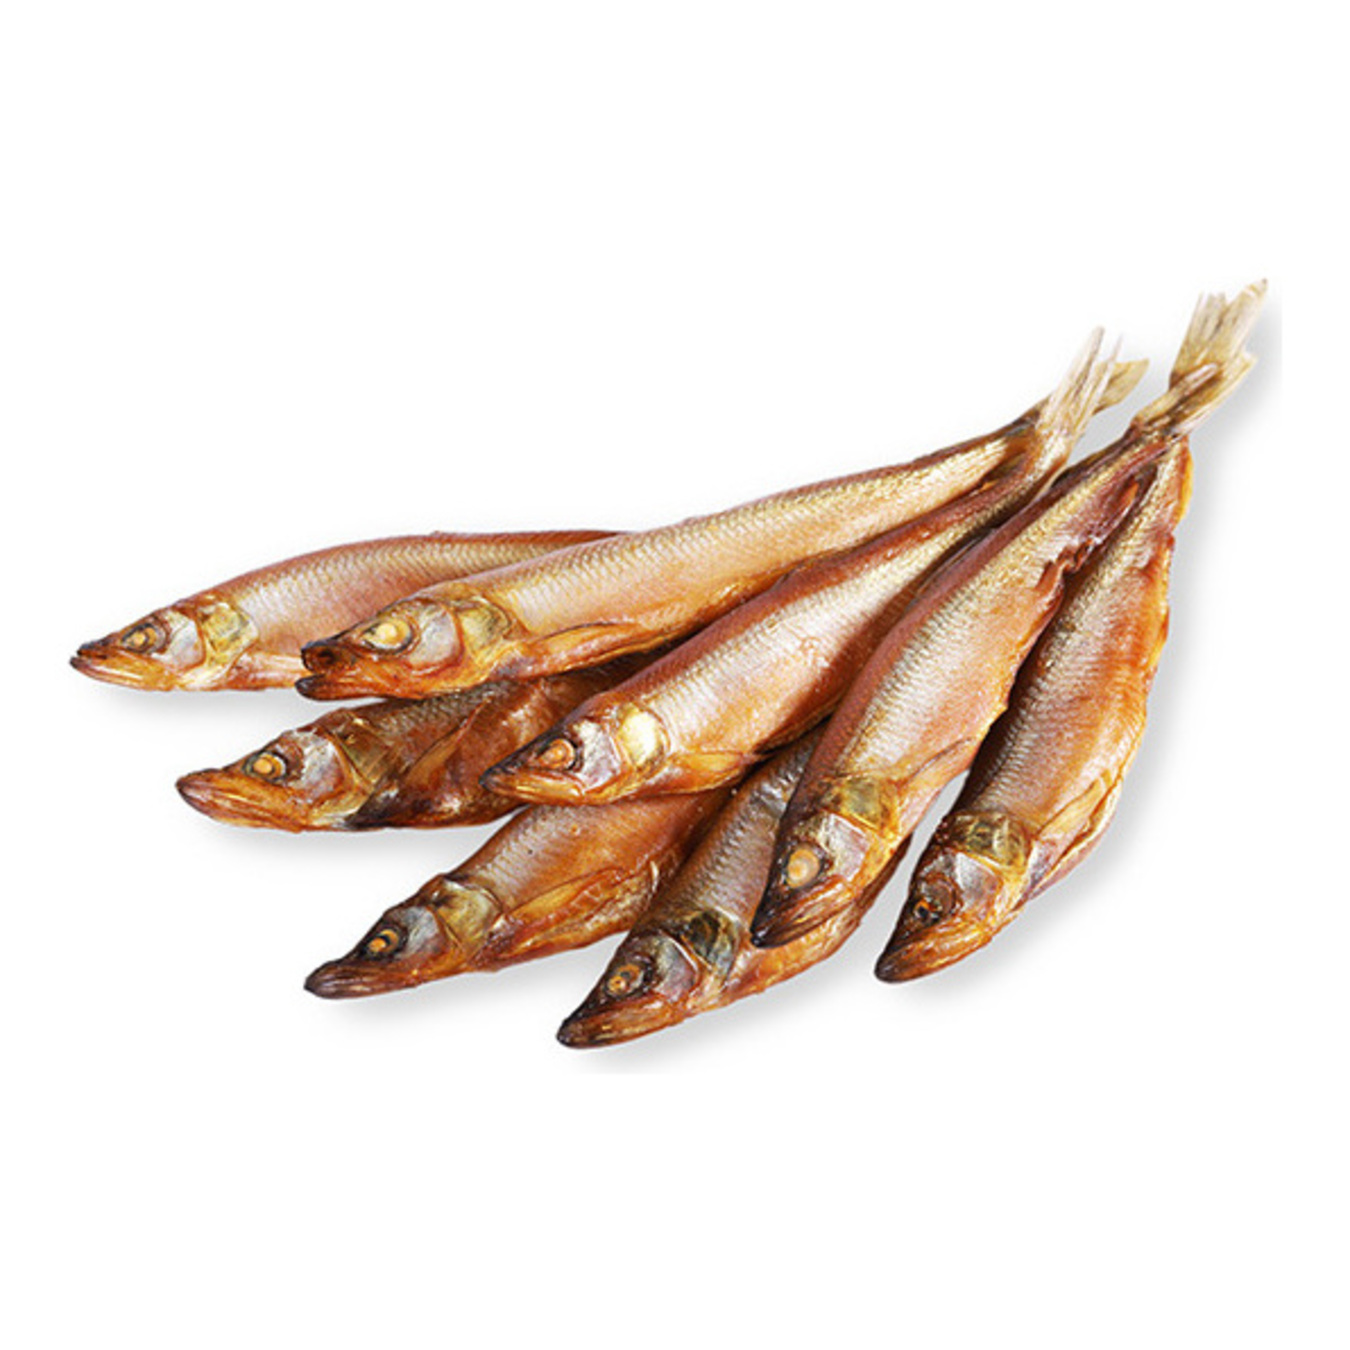 Hot smoked smelt chilled